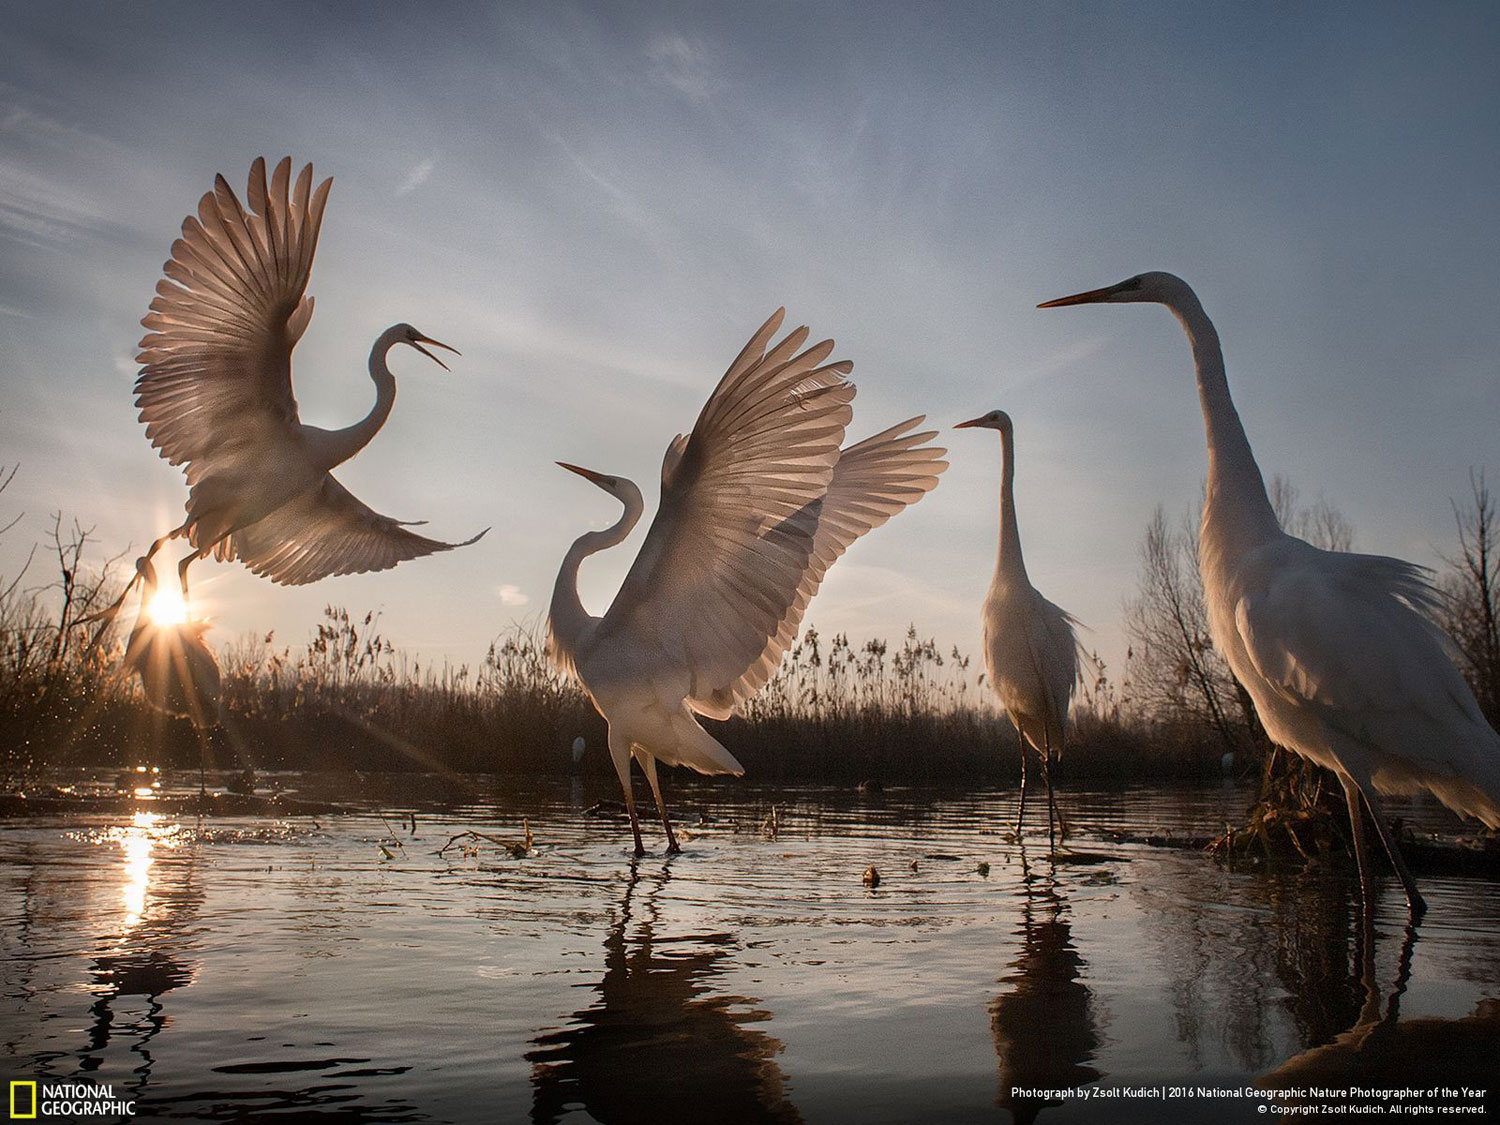 Changing Fortunes of the Great Egret // Photo and caption by Zsolt Kudich